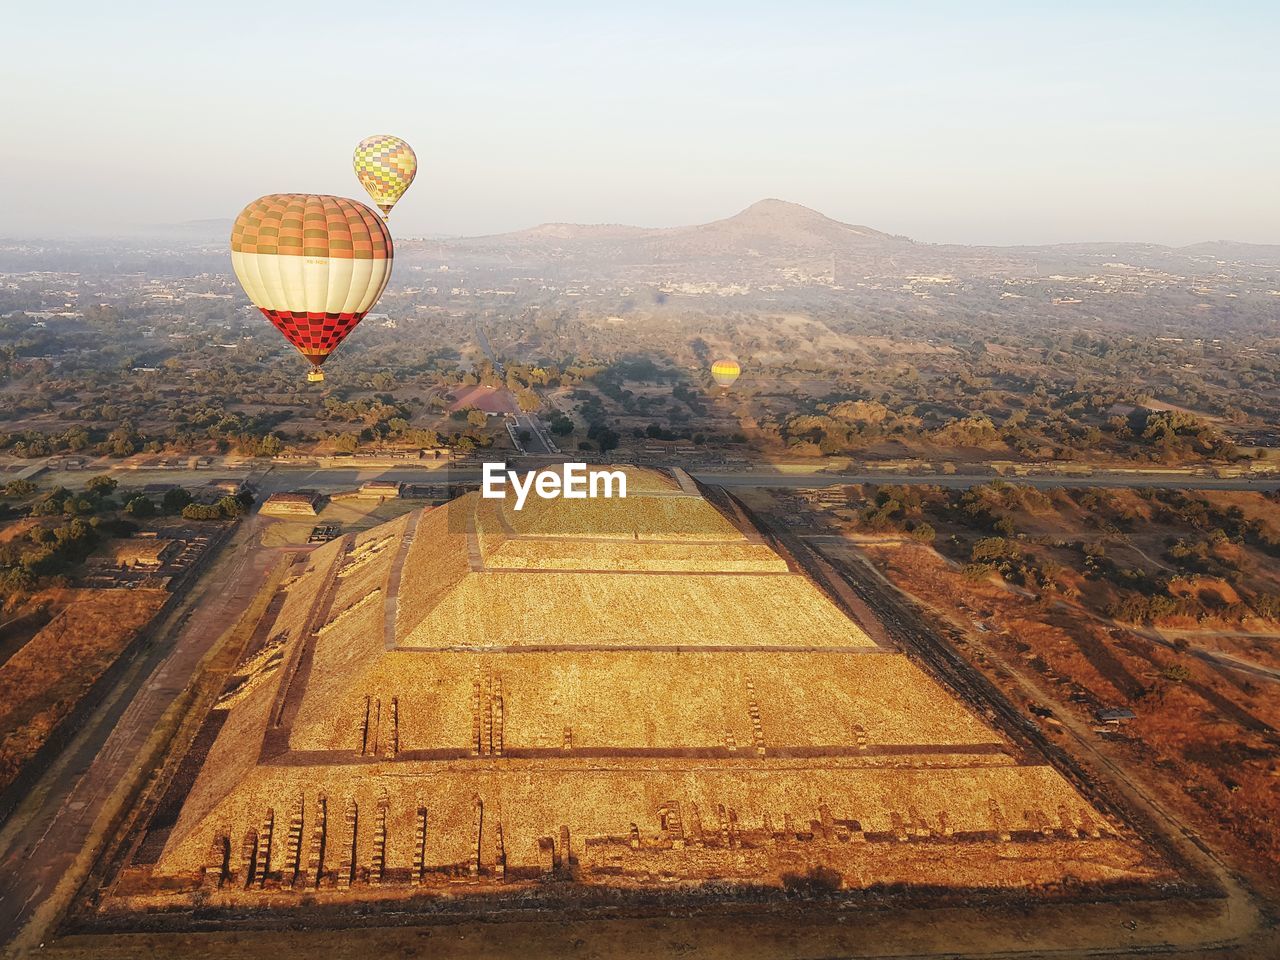 View of hot air balloon flying over landscape and ancient pyramid